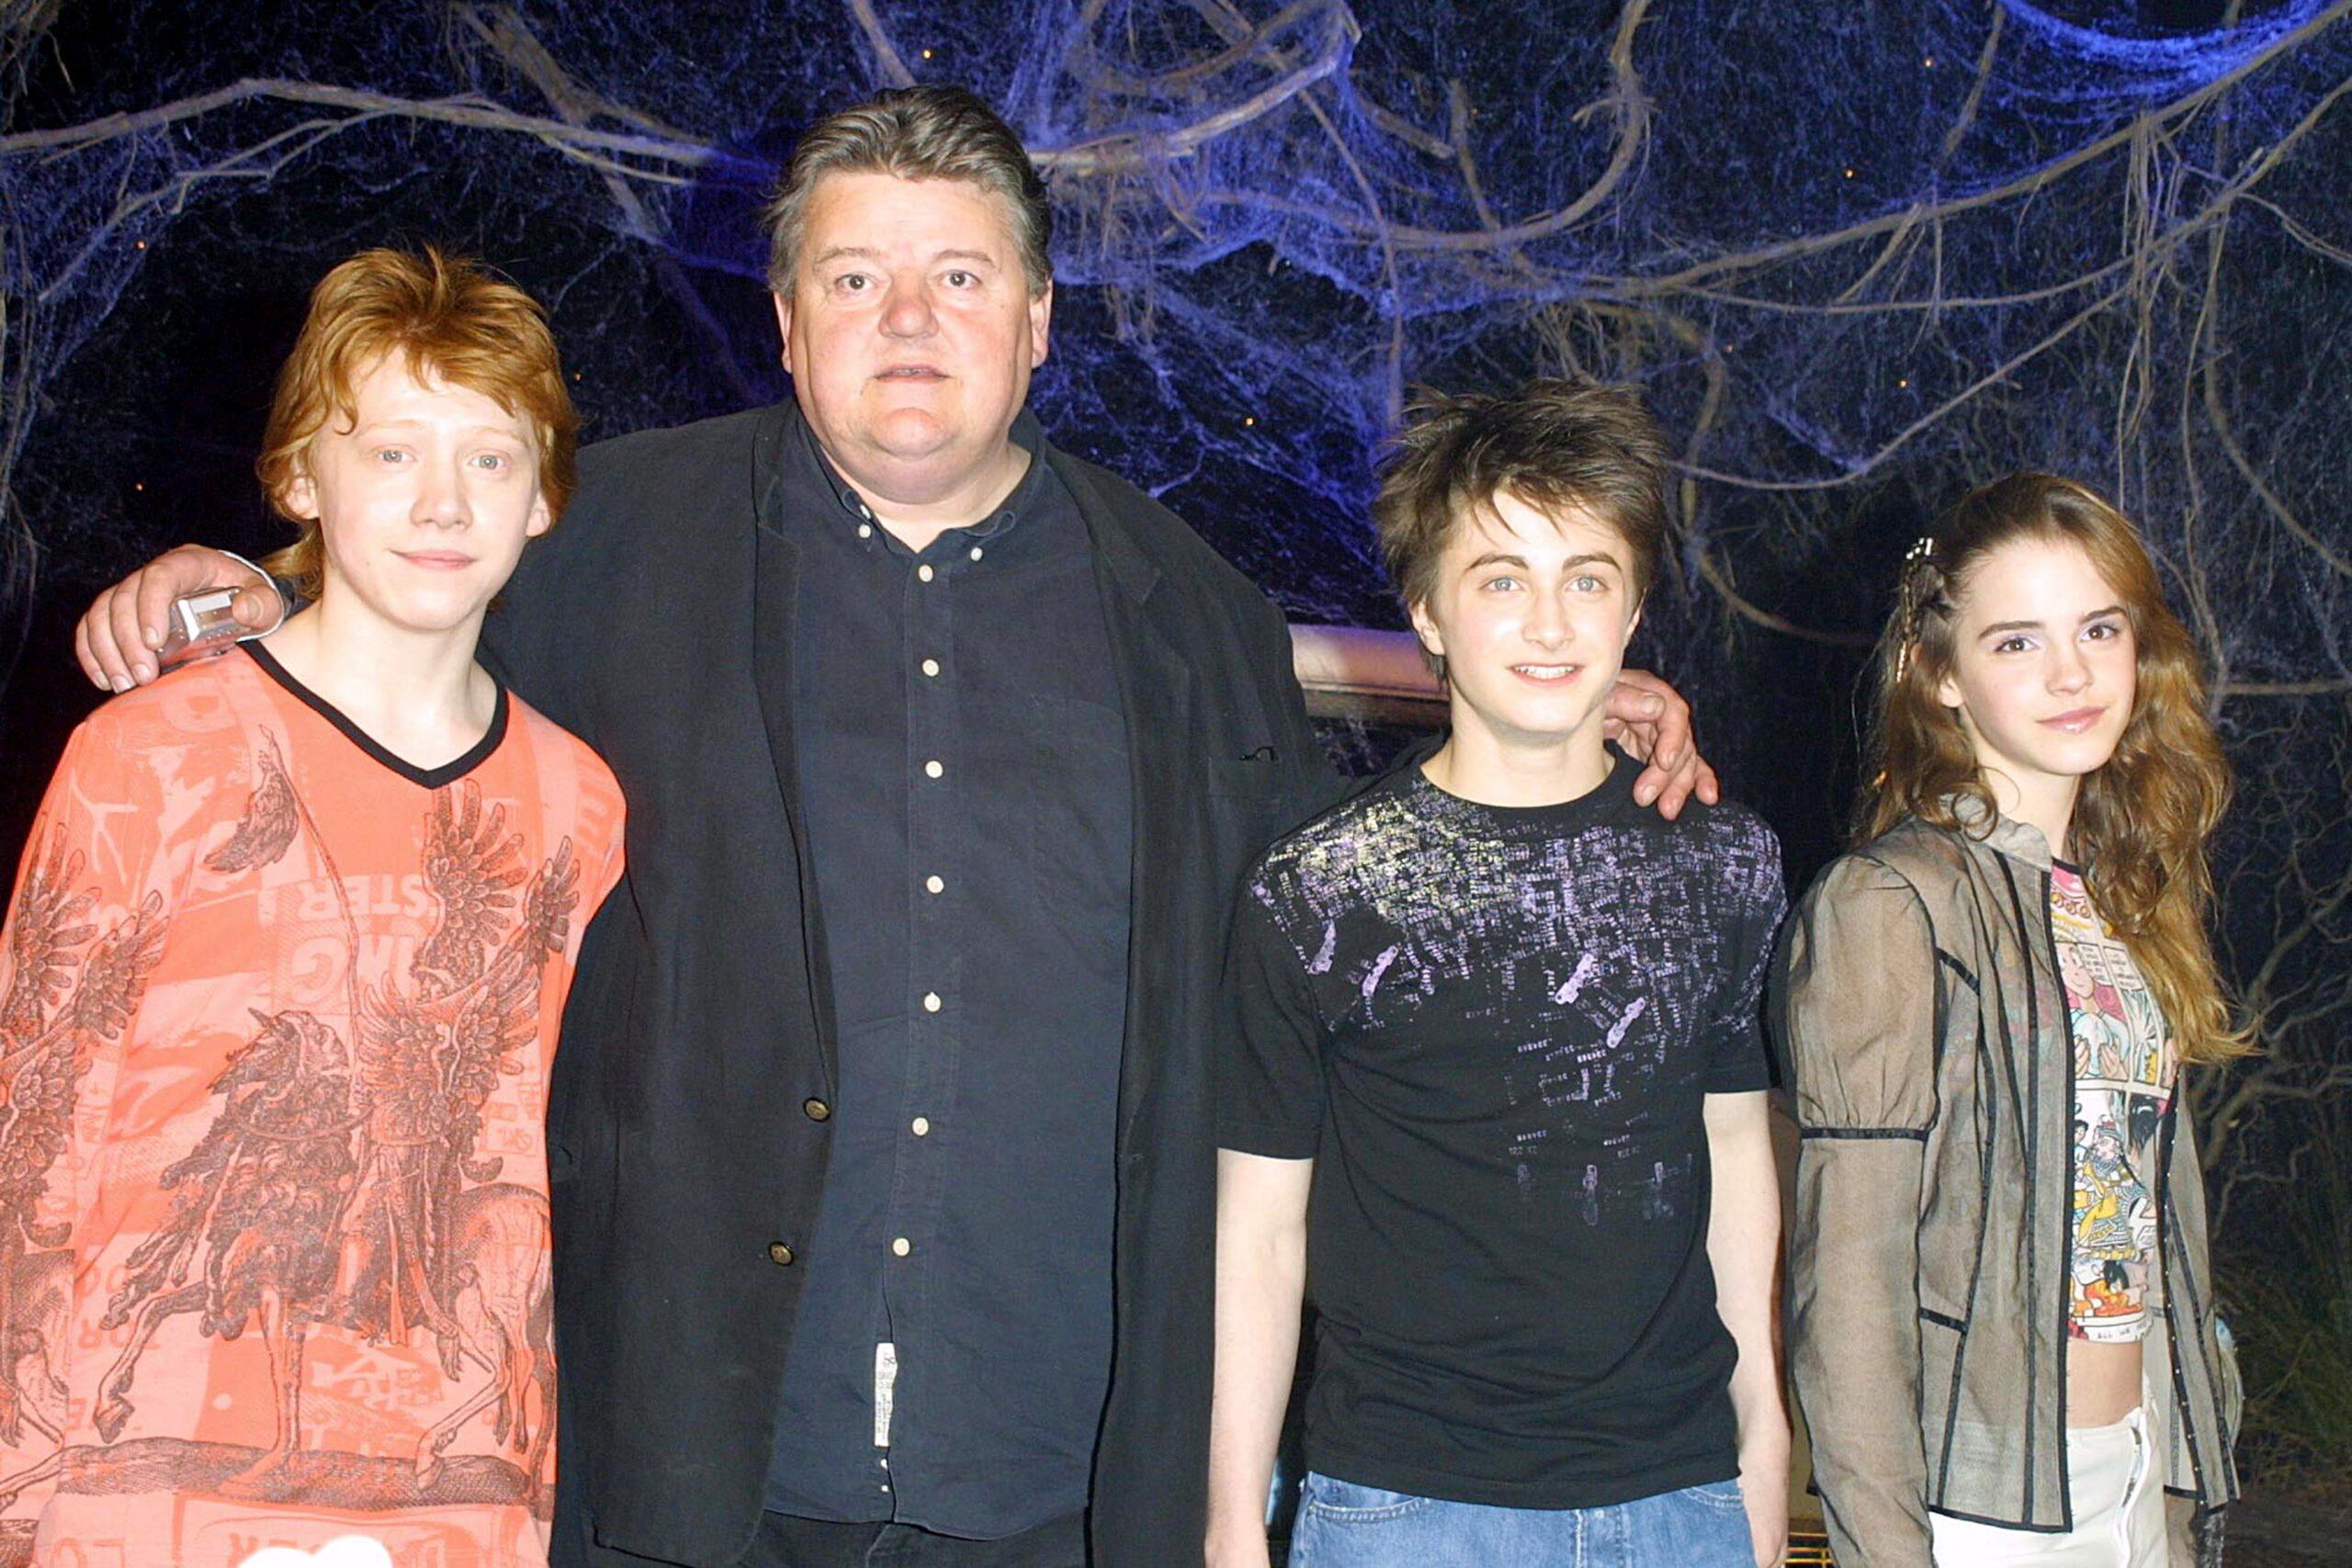 Archive picures taken in 2003. 01 Jan 2003 Pictured: Rupert Grint aka Ron, Robbie Coltrane aka Hagrid, Daniel Radcliffe aka Harry Potter and Emma Watson aka Hermione at the DVD launch of the hit movie Harry Potter and the Chamber of Secrets. The event took place at Leavesden Studios in Hertfordshire, England. Photo credit: MEGA TheMegaAgency.com +1 888 505 6342 (Mega Agency TagID: MEGA163420_011.jpg) [Photo via Mega Agency]